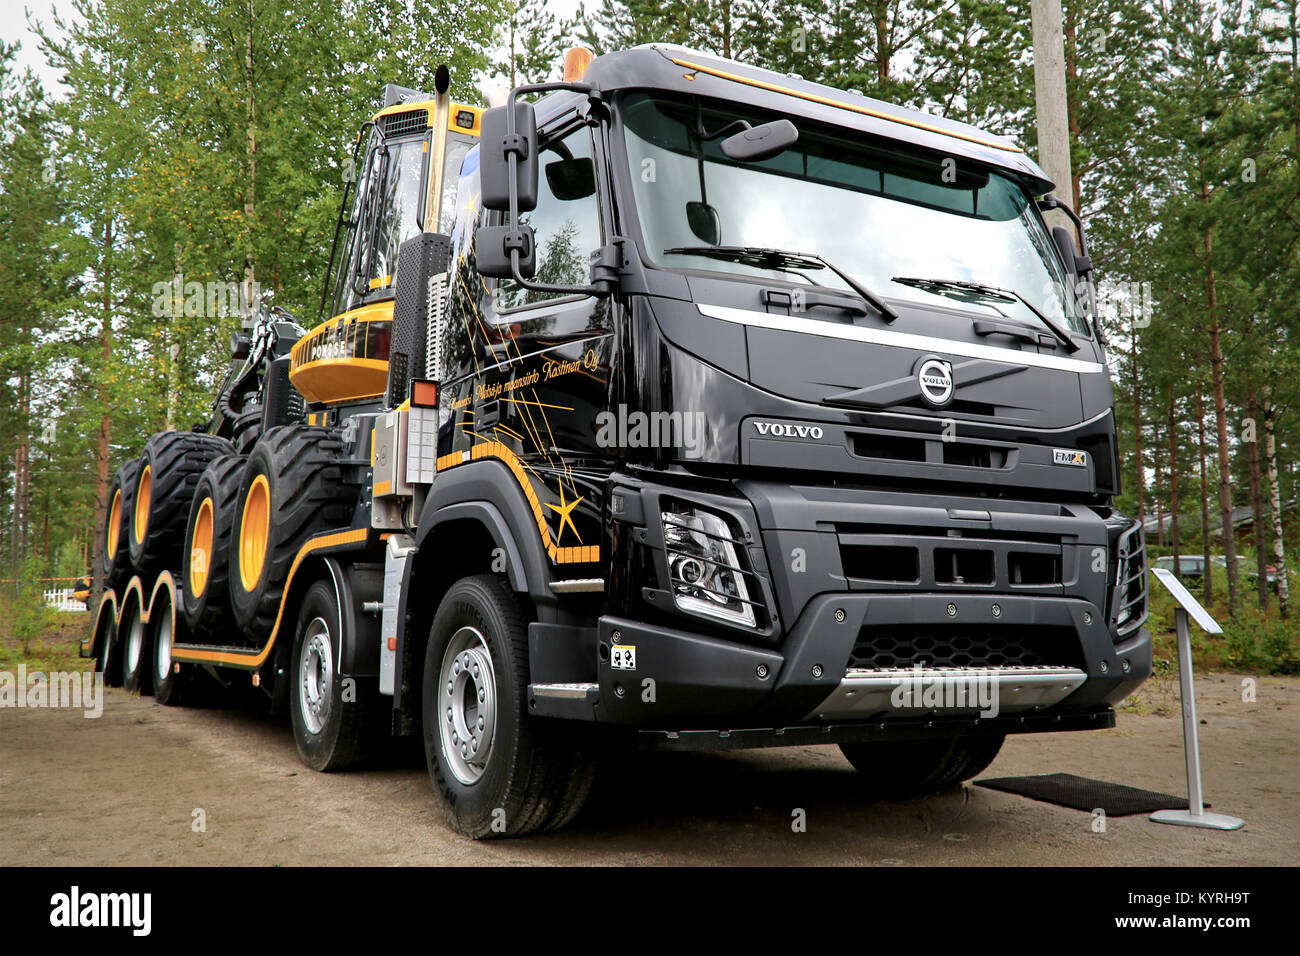 JAMSA, FINLAND - AUGUST 29, 2014: Volvo Trucks presents a black Volvo FMX  10x4 540hp hauling a Ponsse forestry vehicle at FinnMETKO 2014 Stock Photo  - Alamy